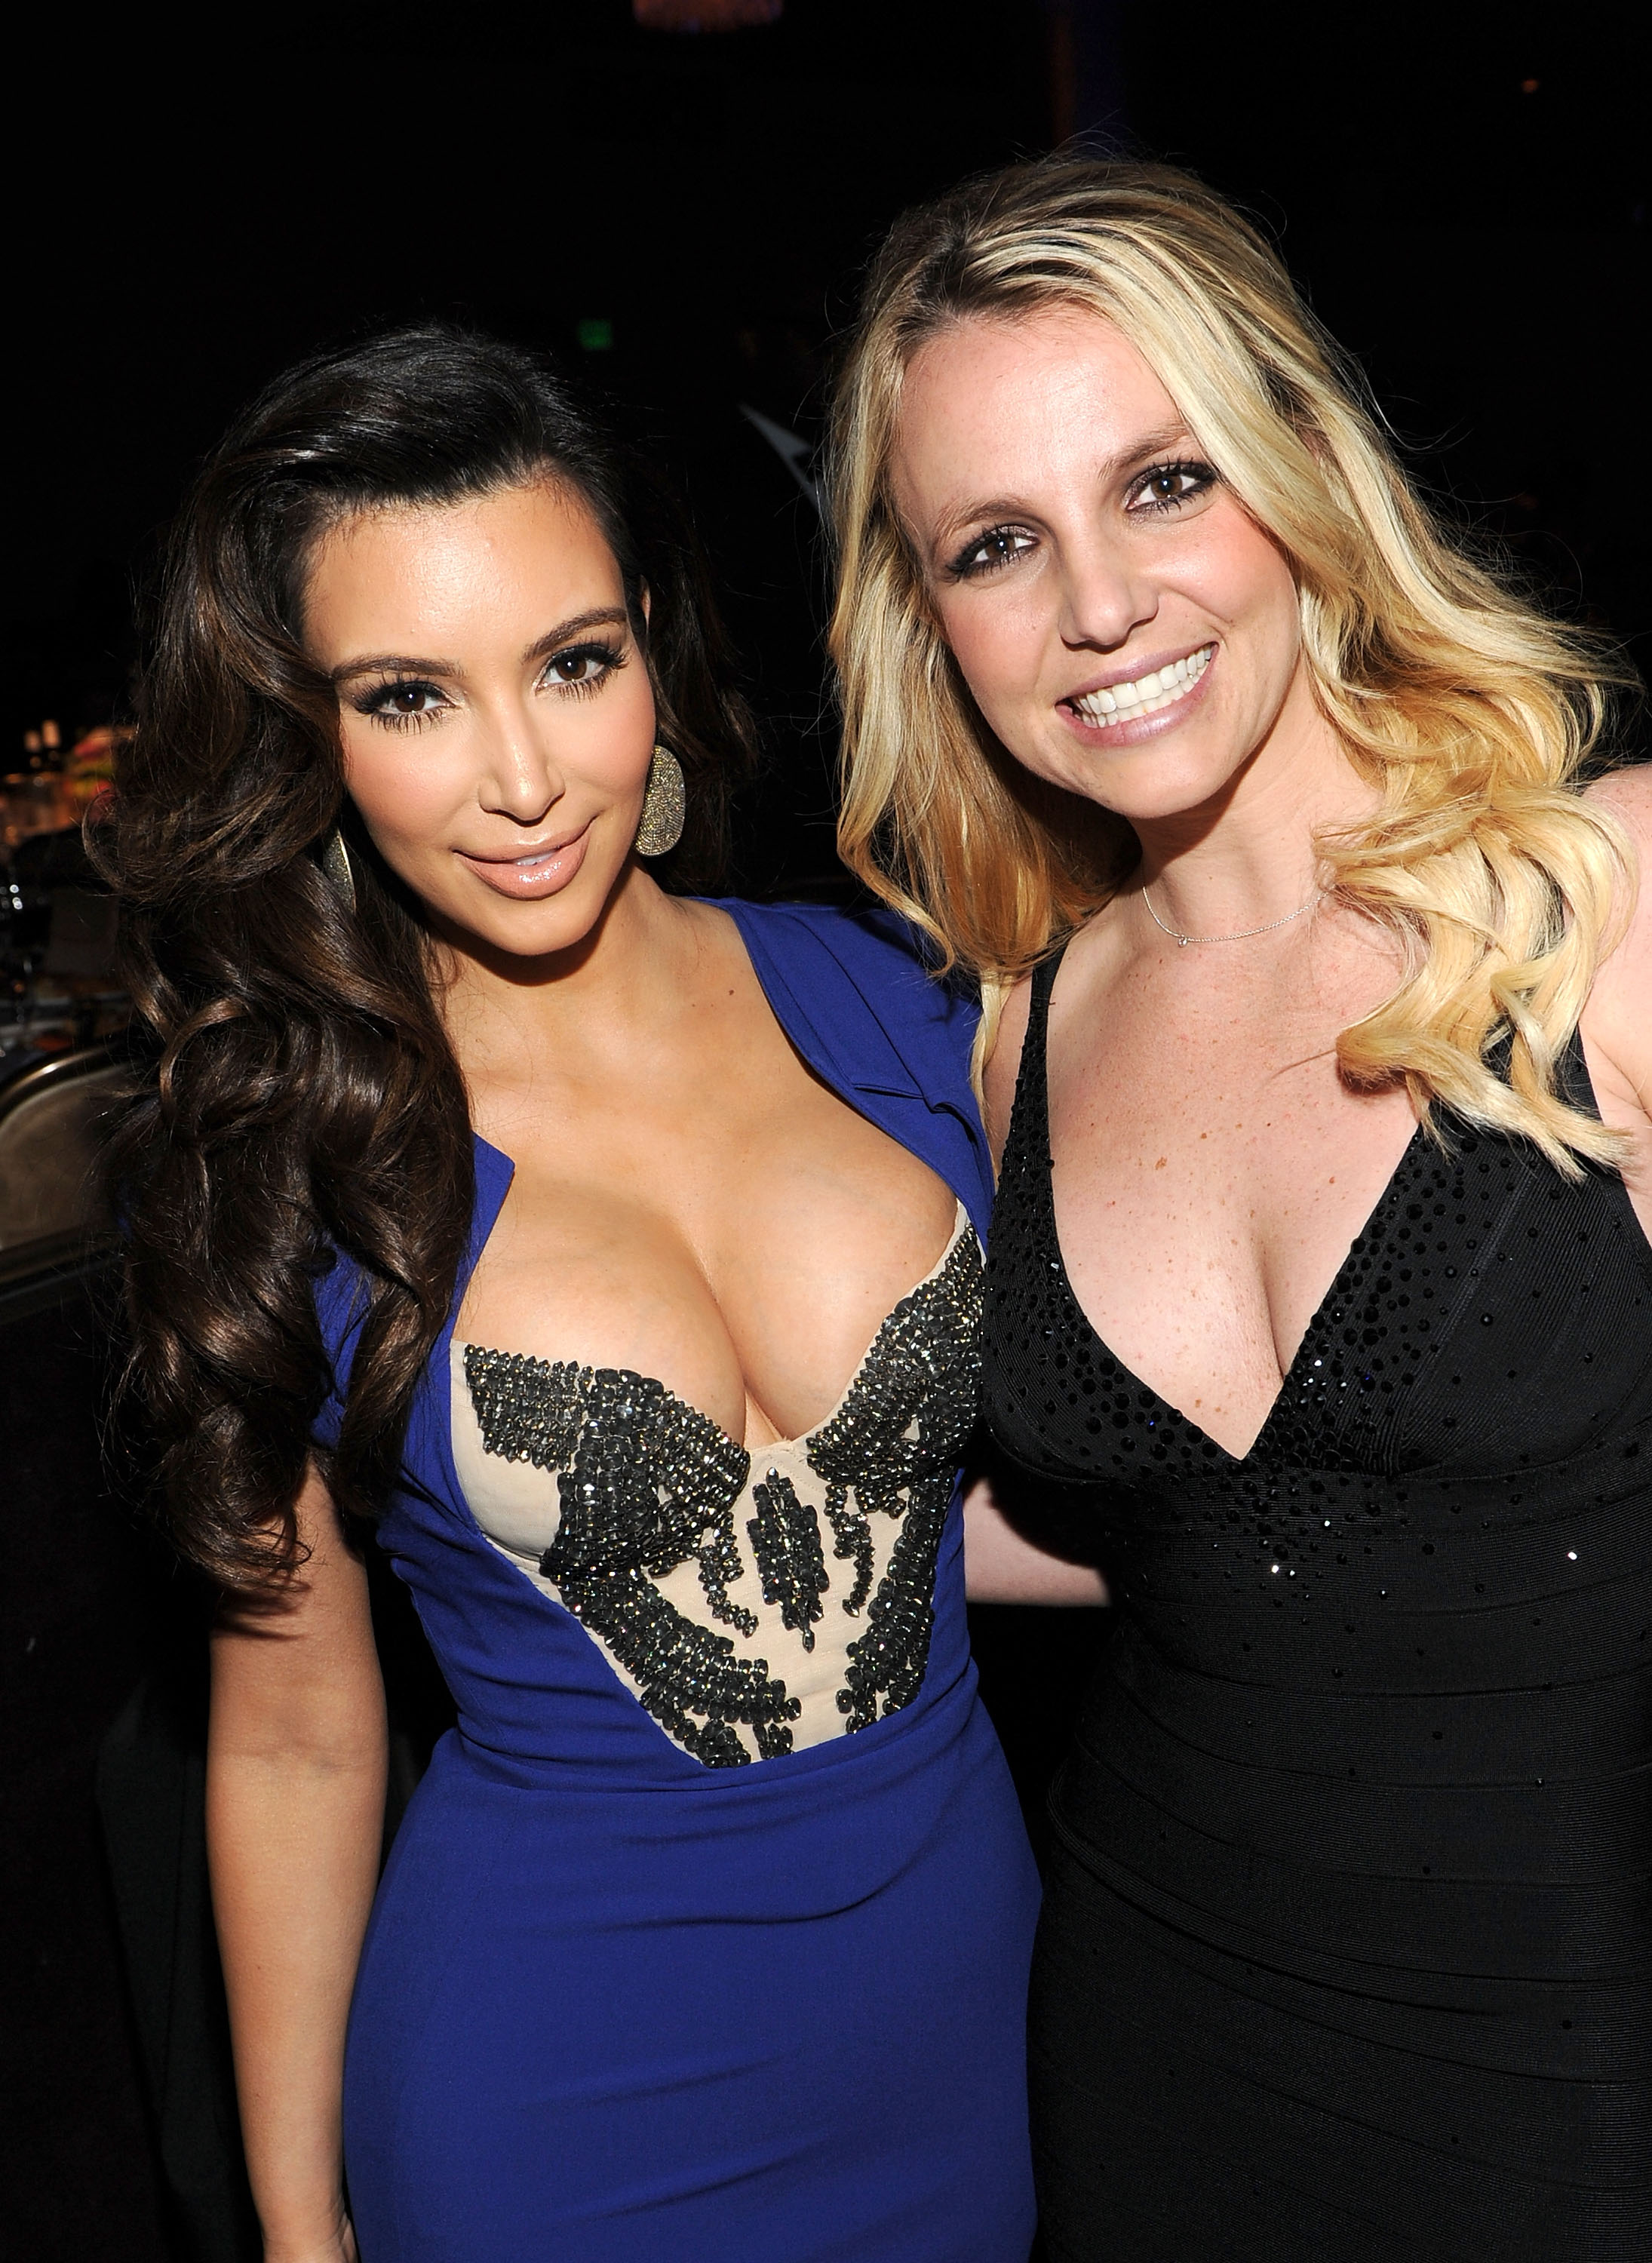 Kim Kardashian (L) and and Britney Spears attend Clive Davis and the Recording Academy's 2012 Pre-GRAMMY Gala at The Beverly Hilton Hotel on Feb. 11, 2012 in Beverly Hills, Calif. (Larry Busacca&mdash; Getty Images)